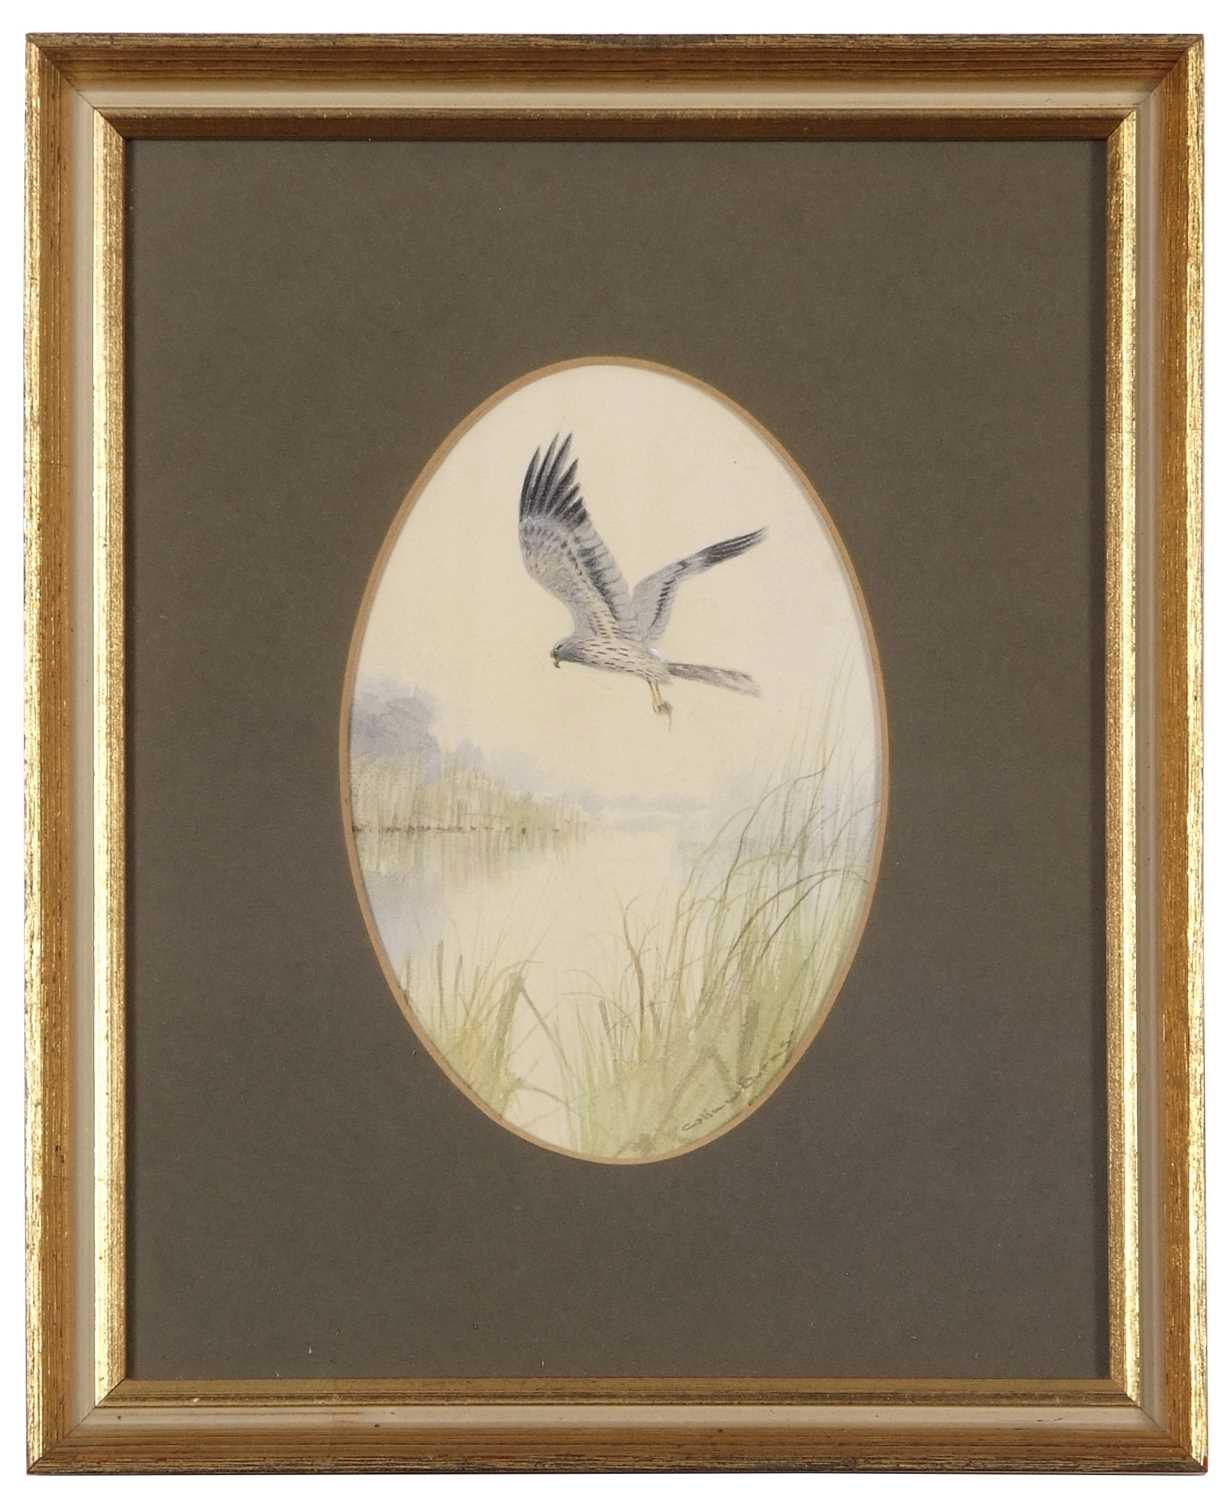 Colin Burns (British, b.1944), "Male Montagu's Harrier at Horsey Mere", watercolour in oval,